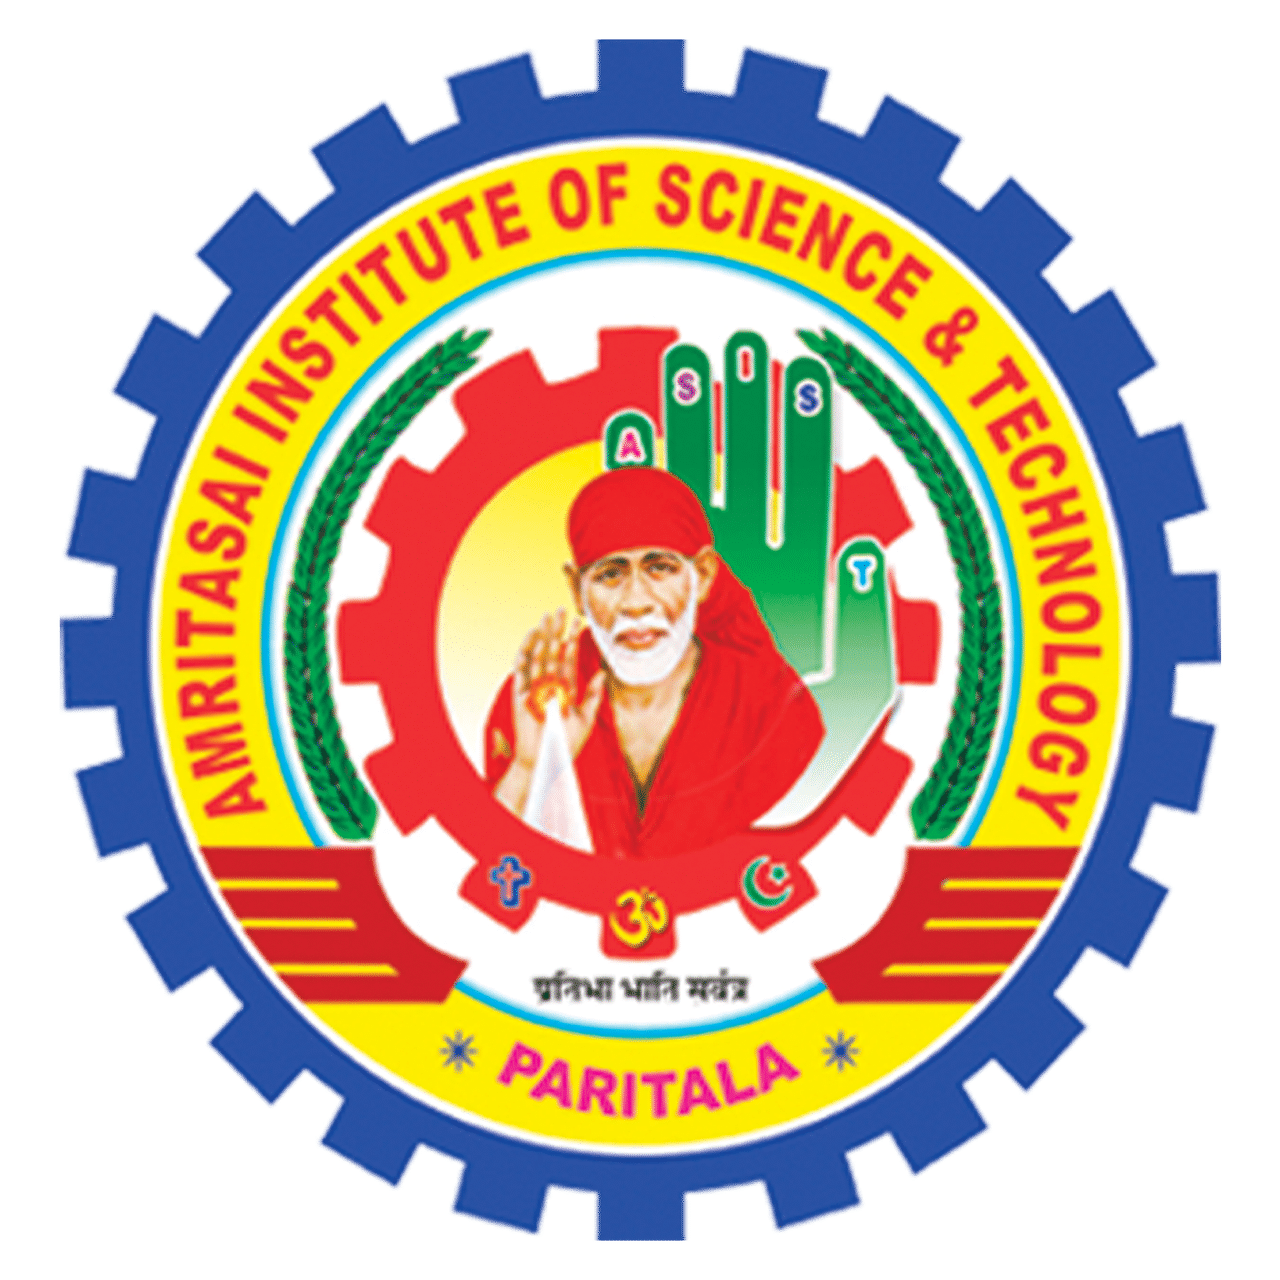 AMRITA SAI INSTITUTE OF SCIENCE AND TECHNOLOGY